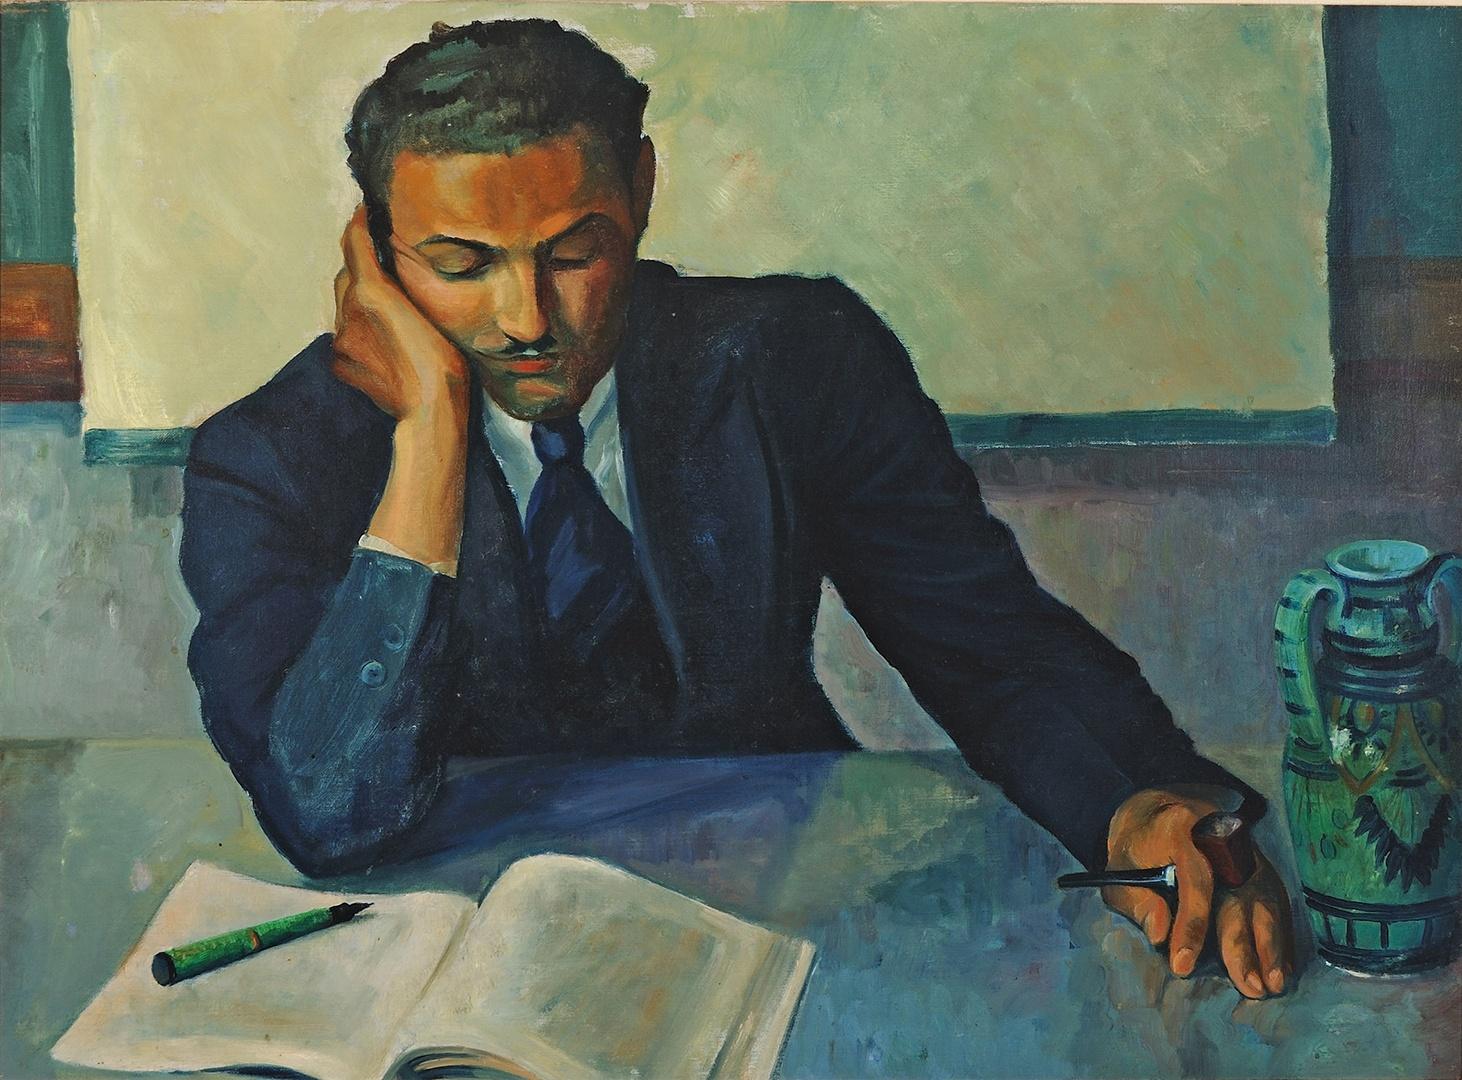 Hilda Wilkinson Brown's "Young Man Studying" painting.